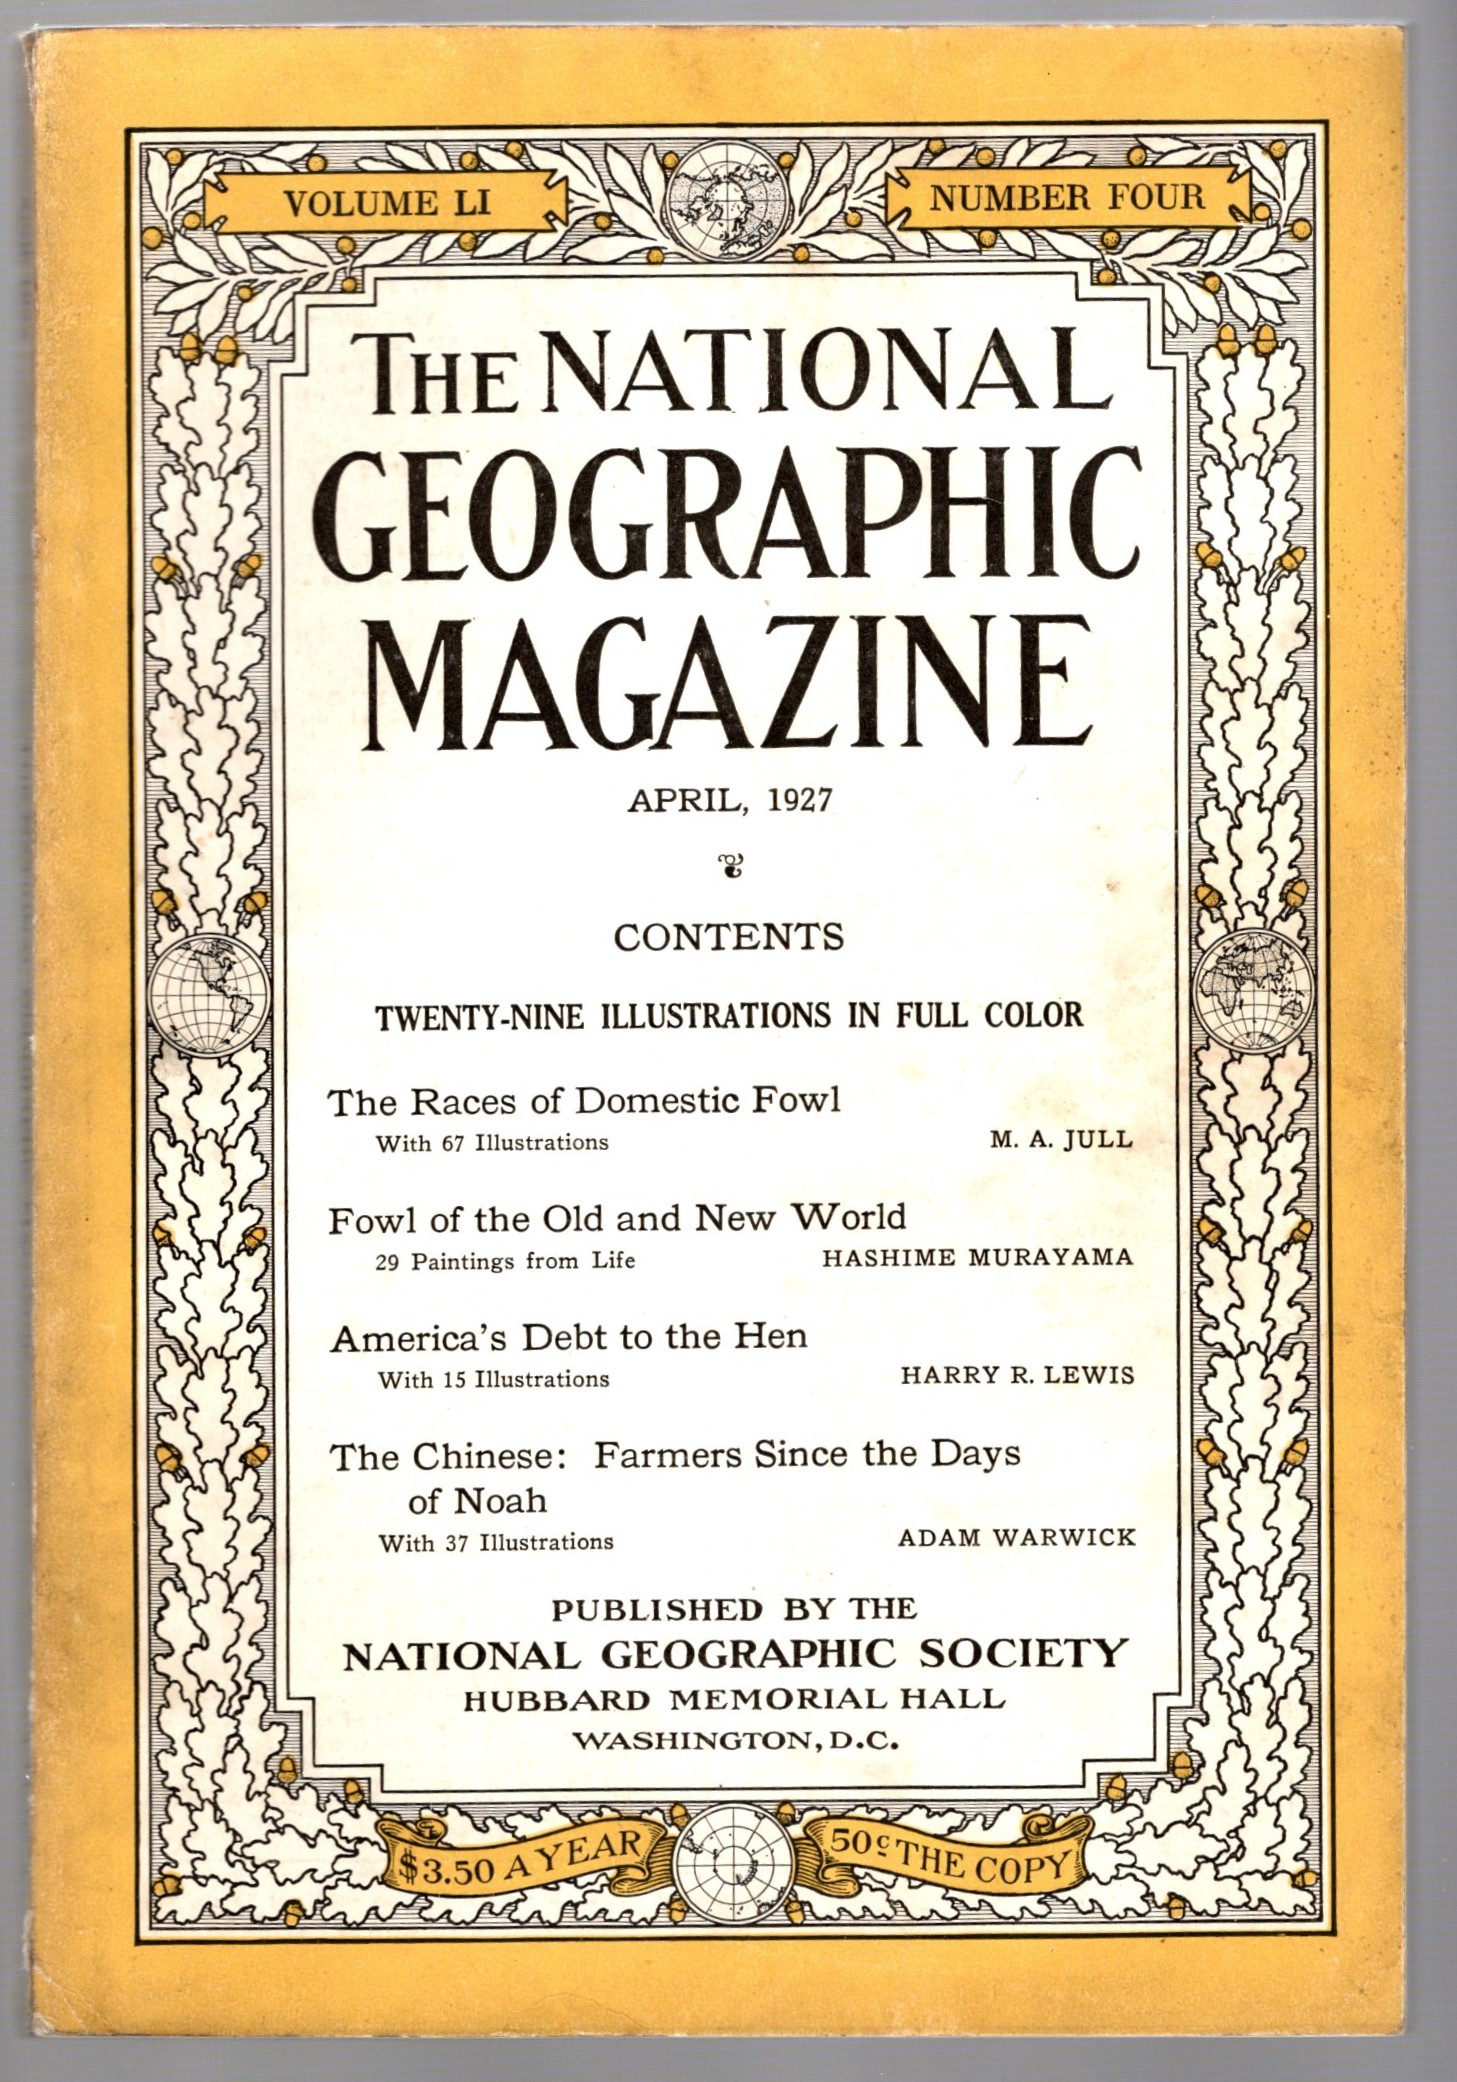 Image for National Geographic Magazine, April, 1927 :  Domestic Fowl ; Fowl of Old and New World ; Debt to the Hen ; Chinese Farmers Since Noah